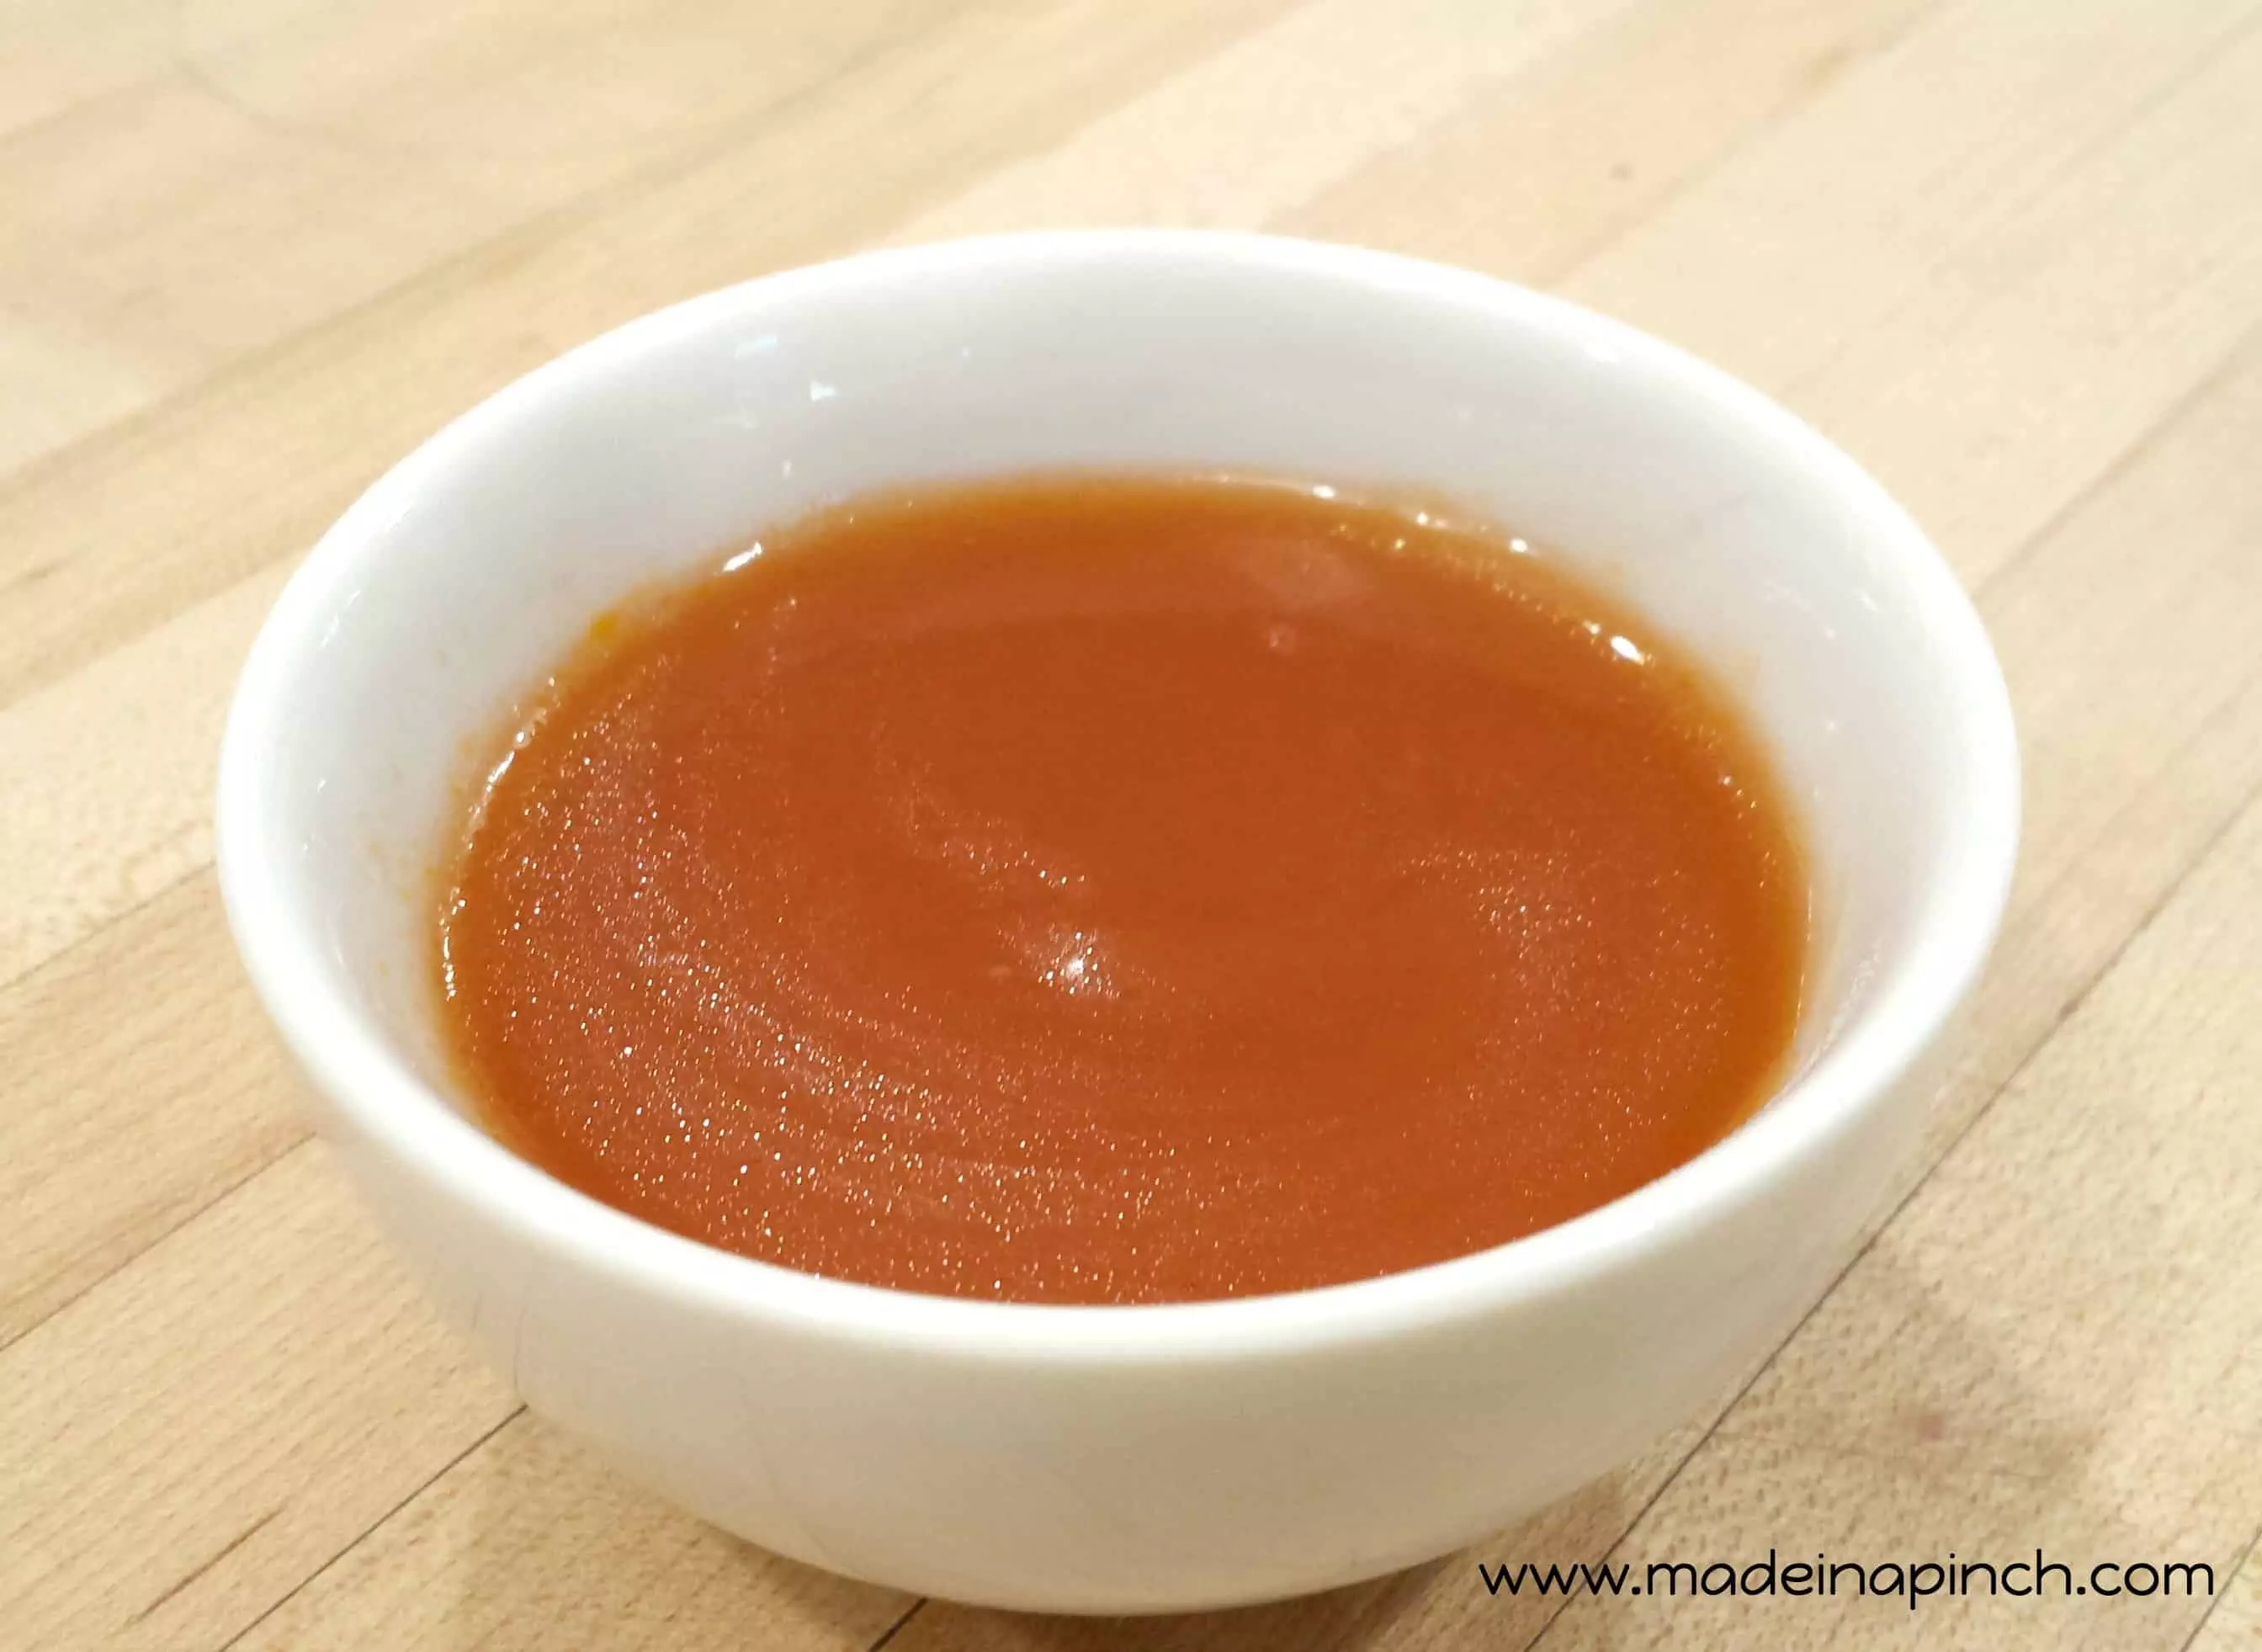 homemade sweet and sour sauce